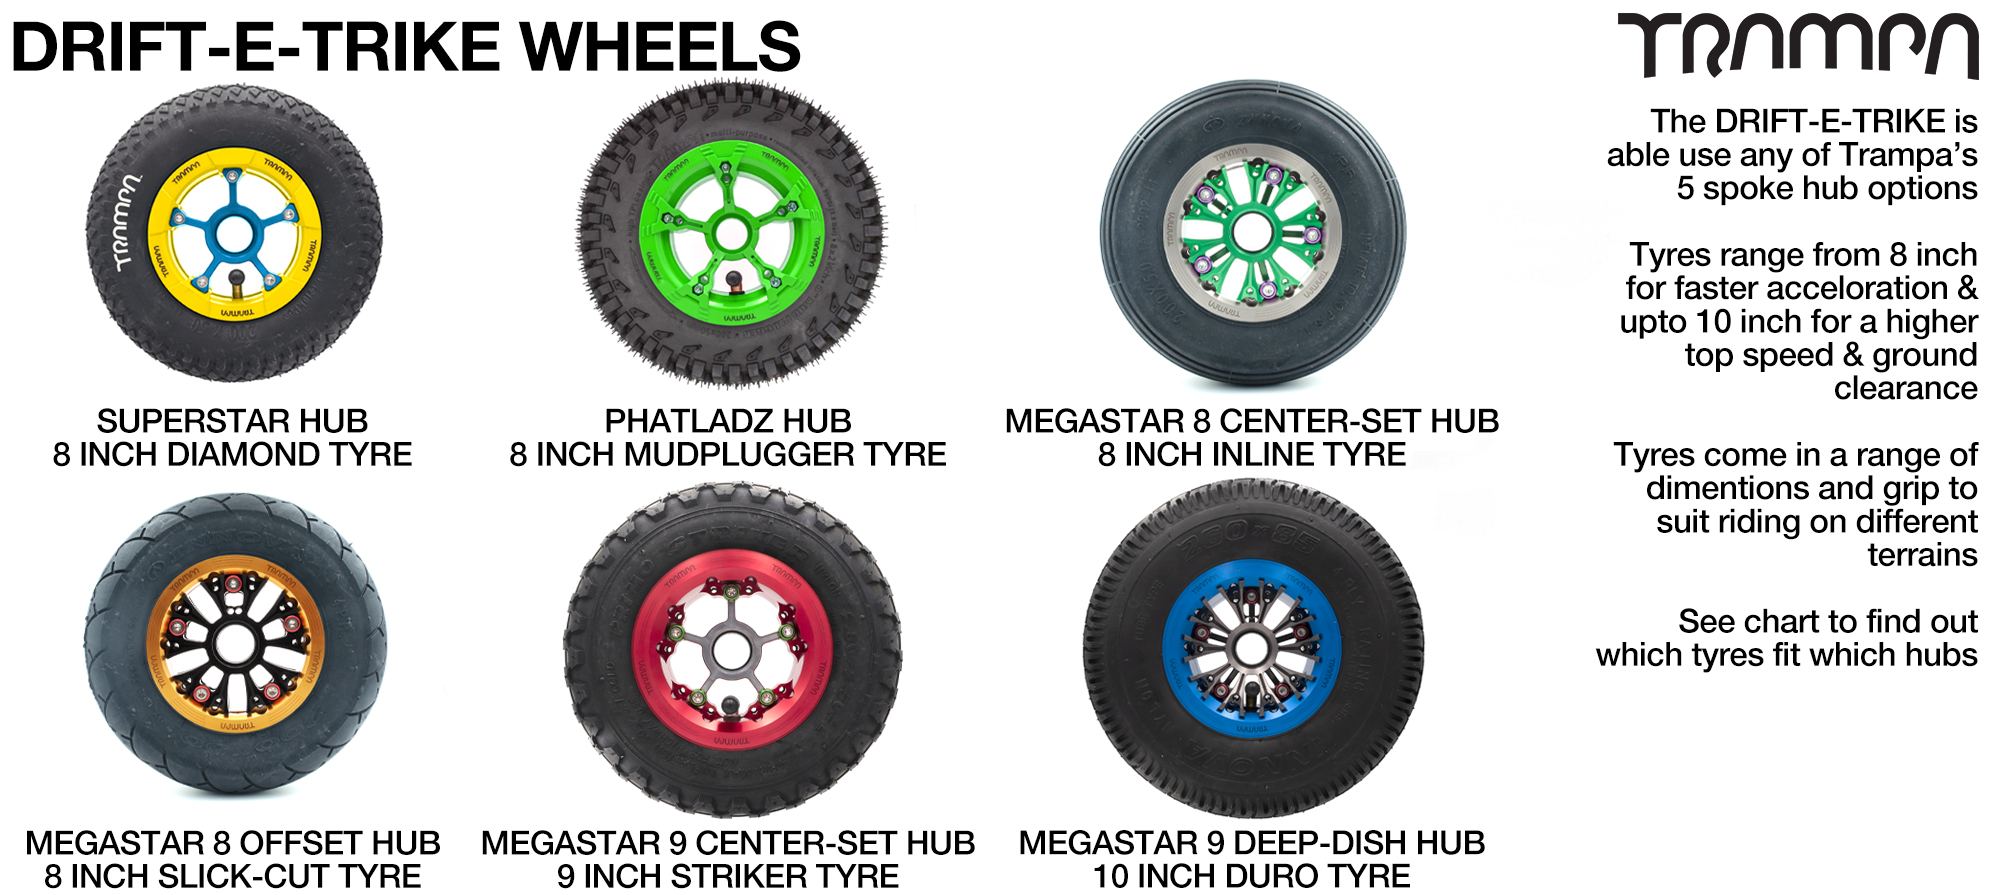  HUBS & TYRES that fit the DRIFT-E-TRIKE